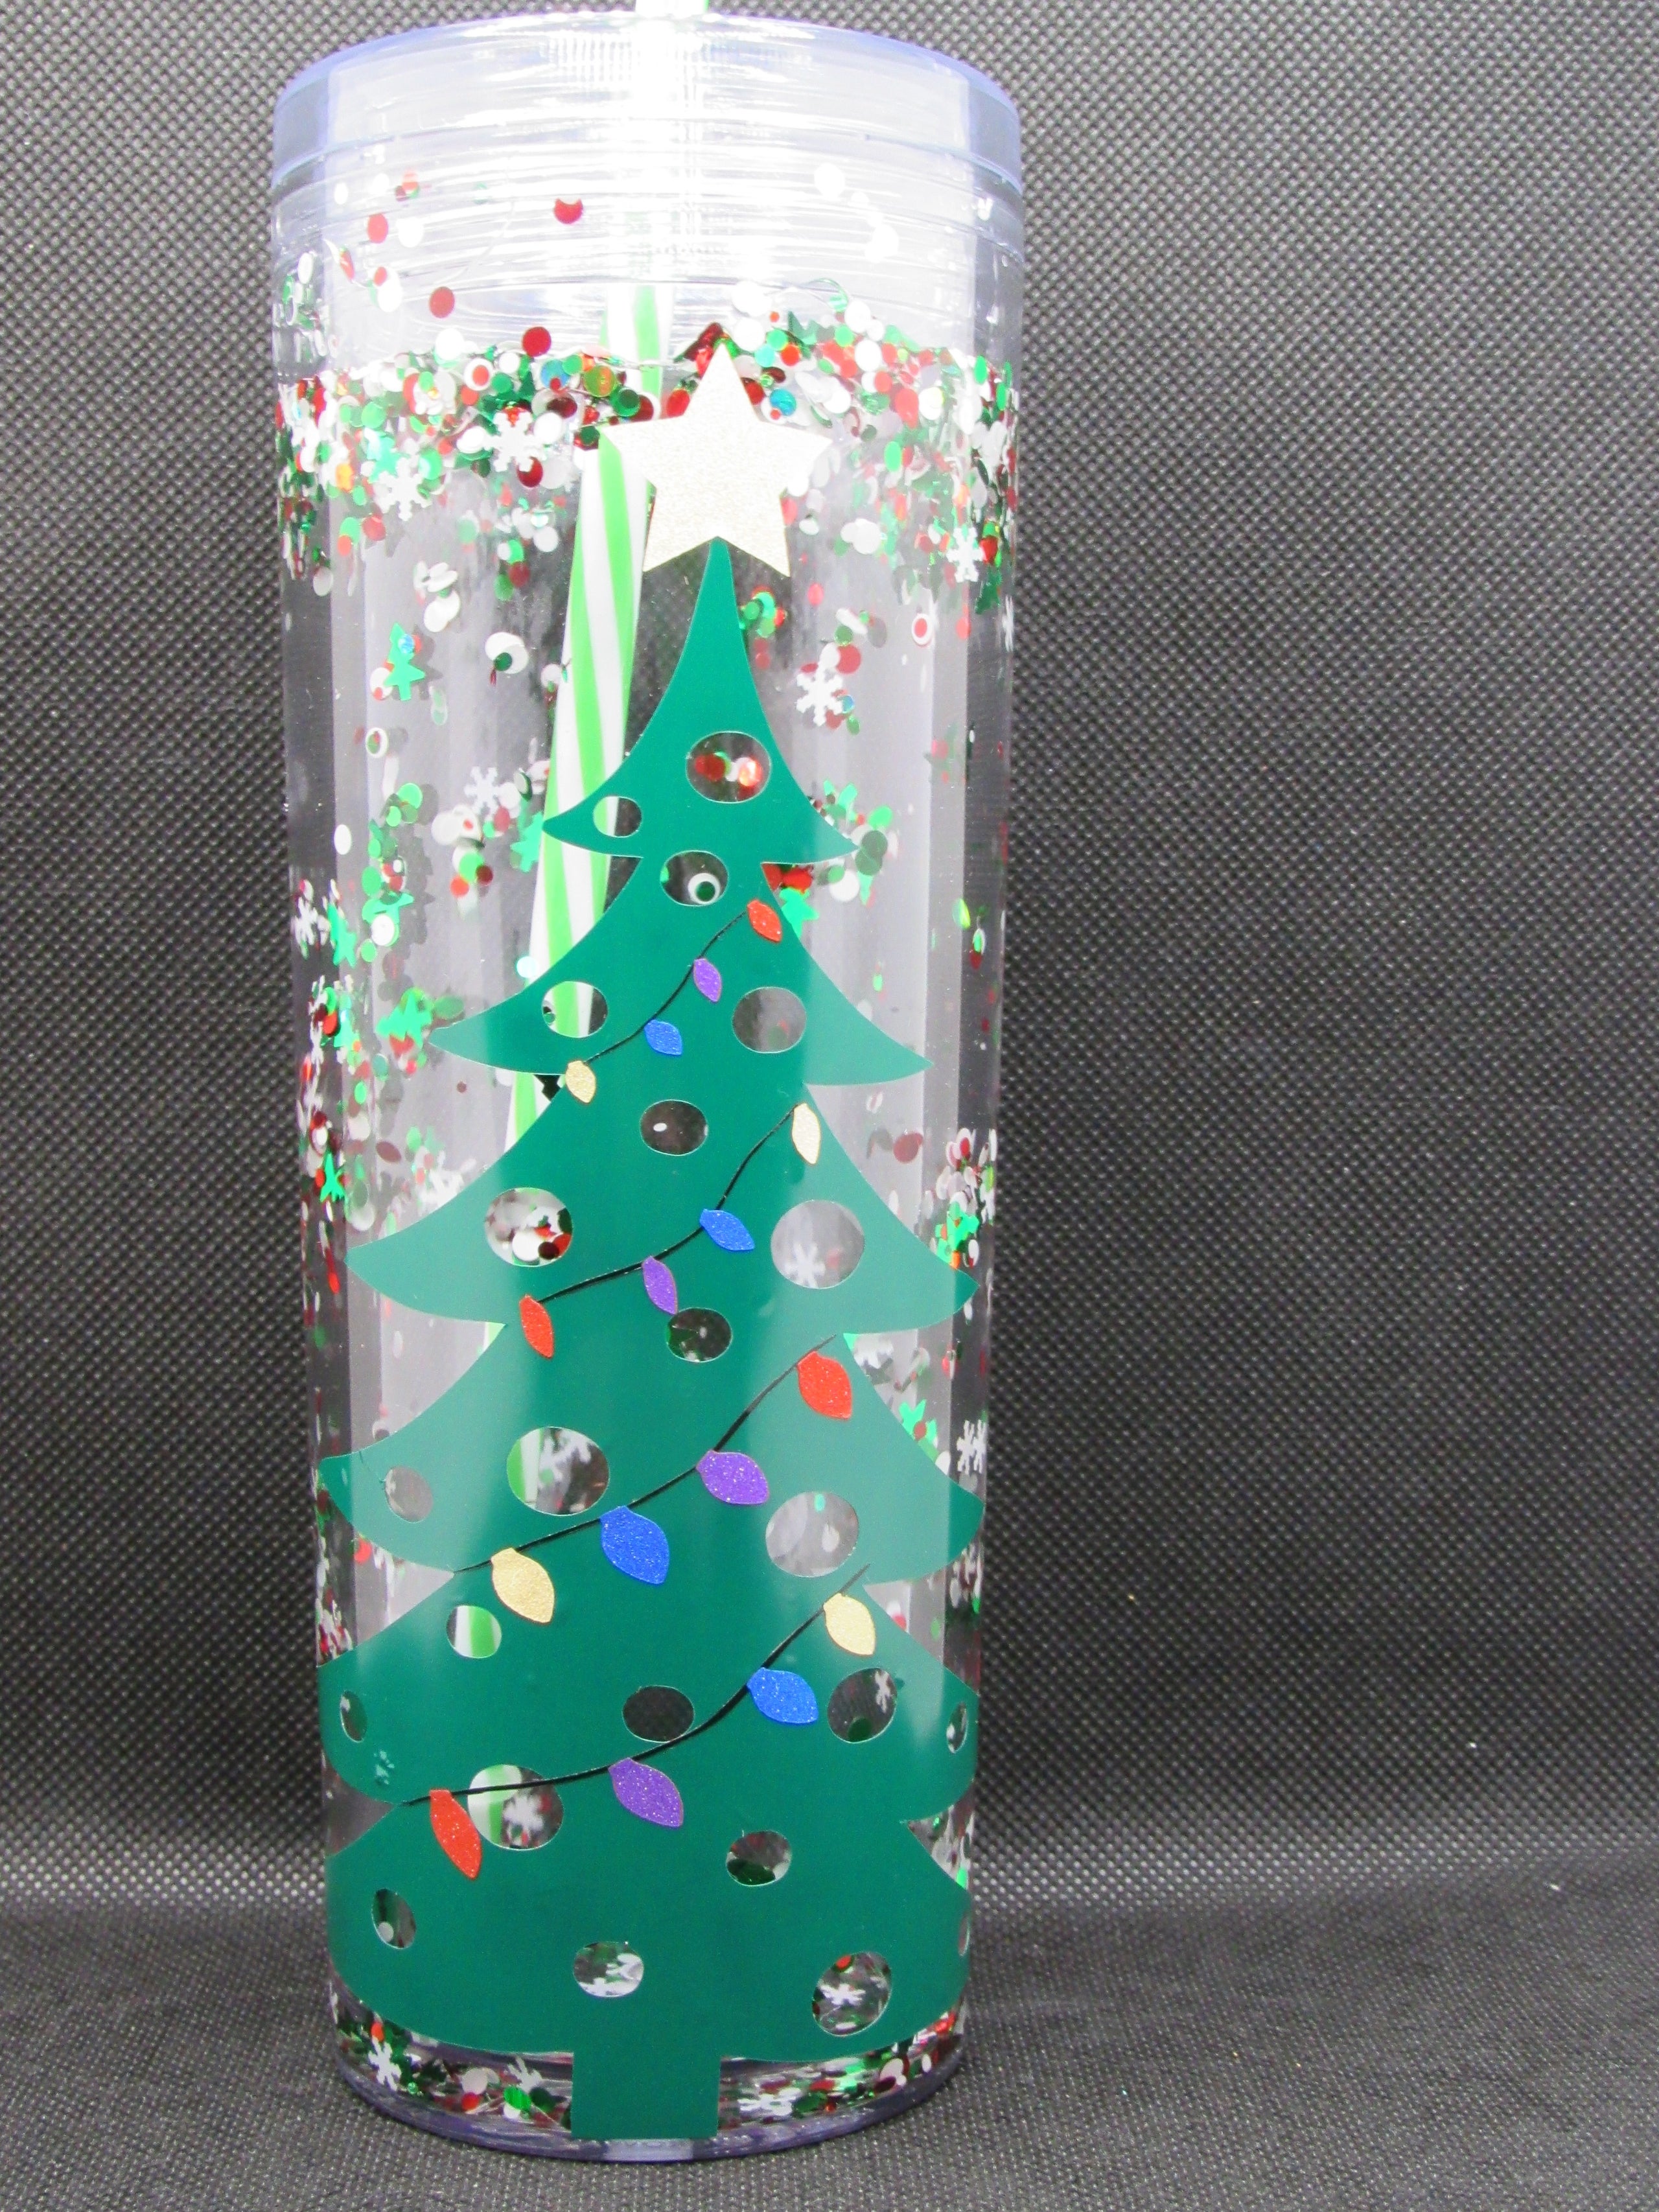 Christmas Snow Globe Tumbler  Shirts, Cups, and Pixie Dust